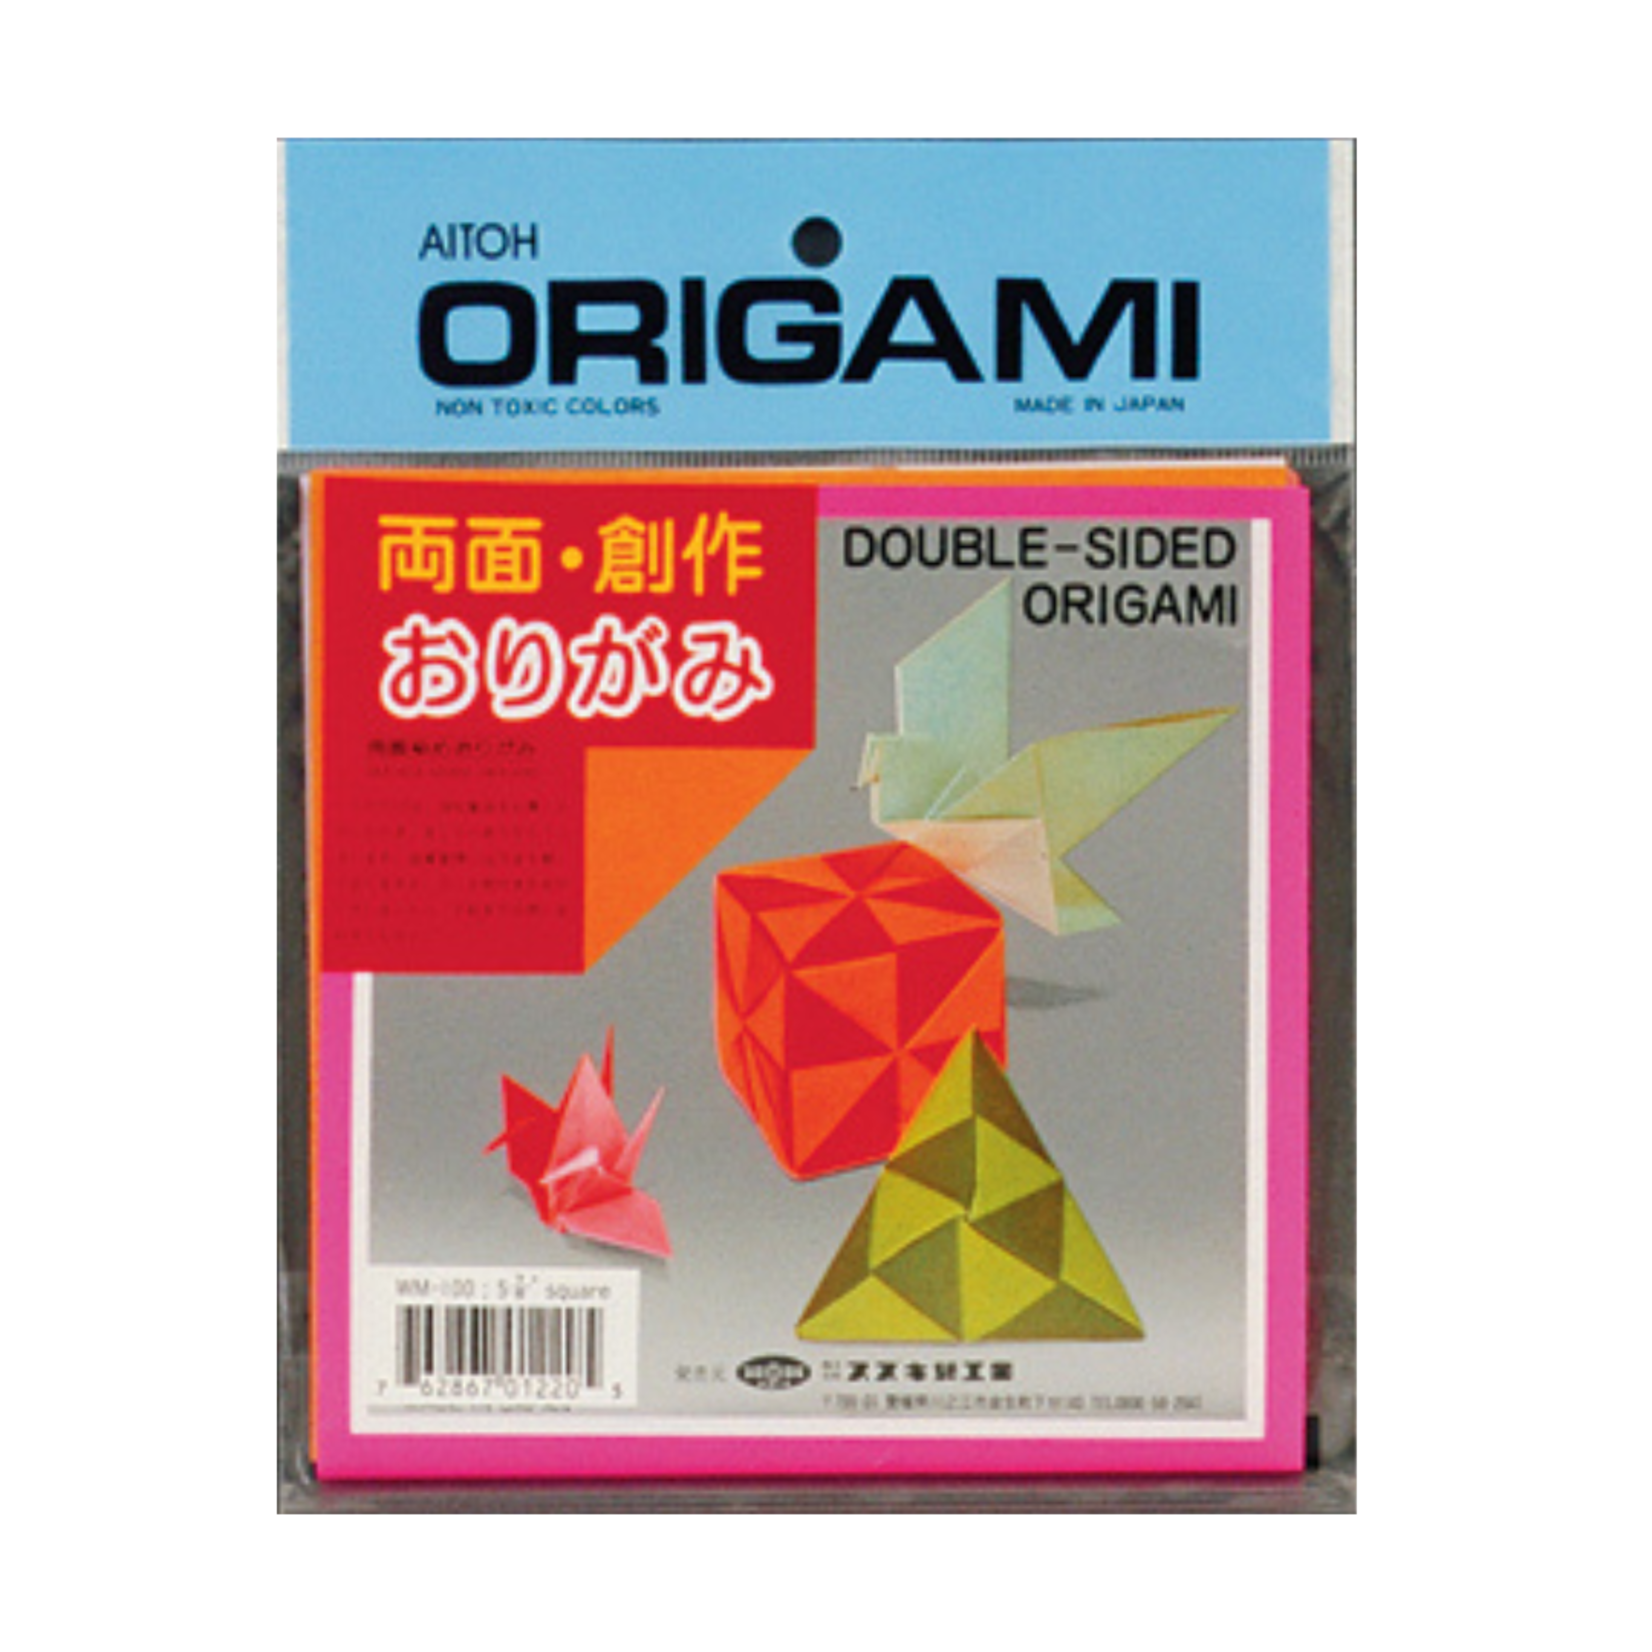 AITOH AITOH ORIGAMI DOUBLE SIDED 5 7/8" ASSORTED COLOURS 36/SHEETS